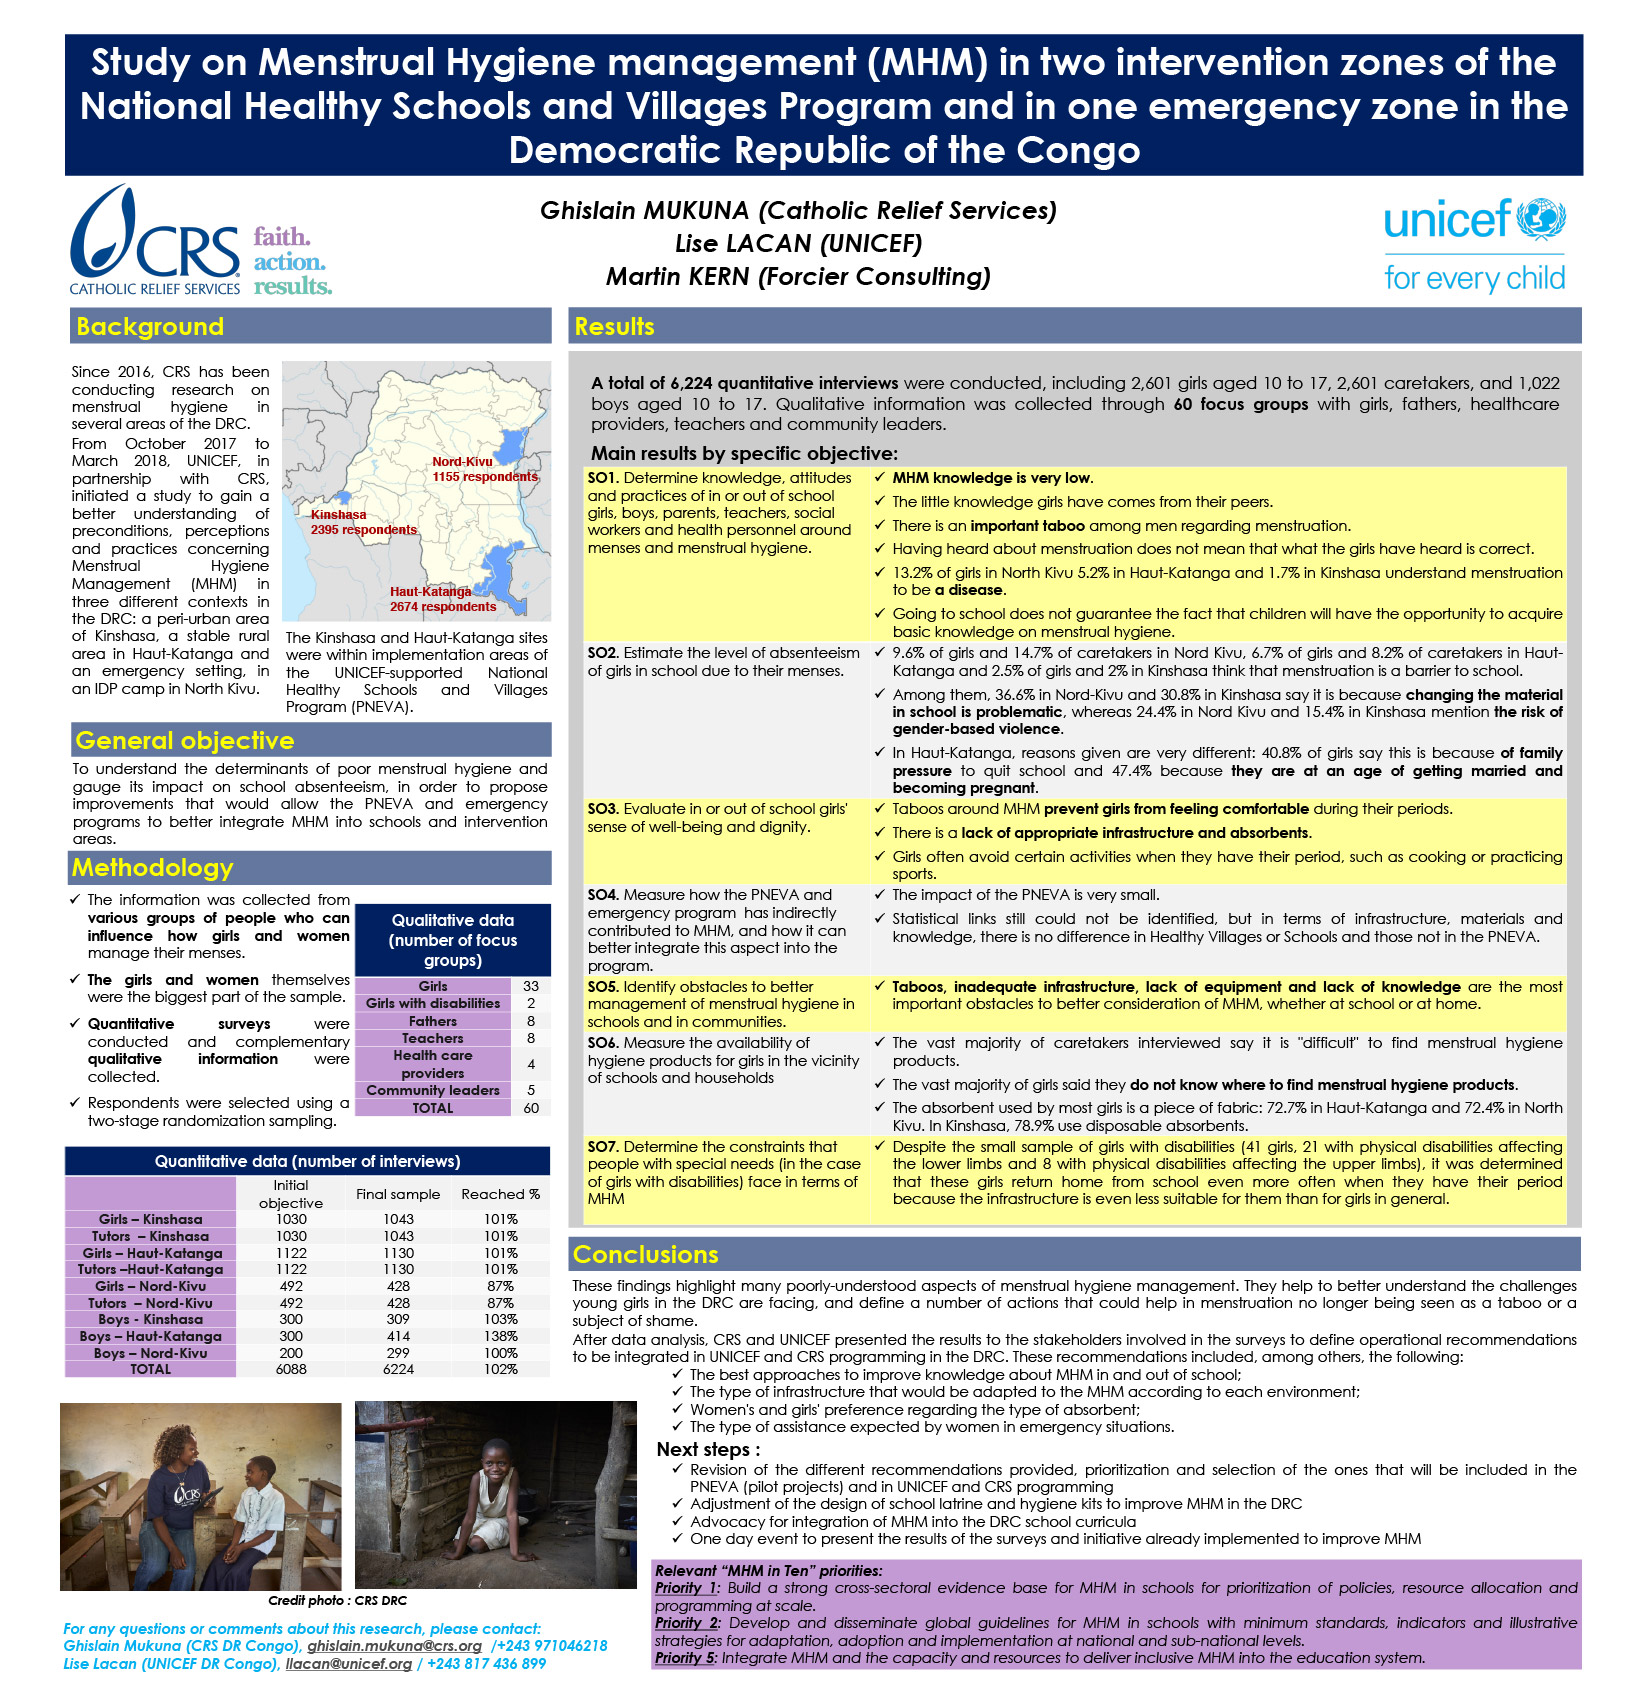 Study on menstrual hygiene managemen(MHM) in two intervention zones of the Healthy School and Village National Program and in one emergency zone in the Democratic Republic of the Congo